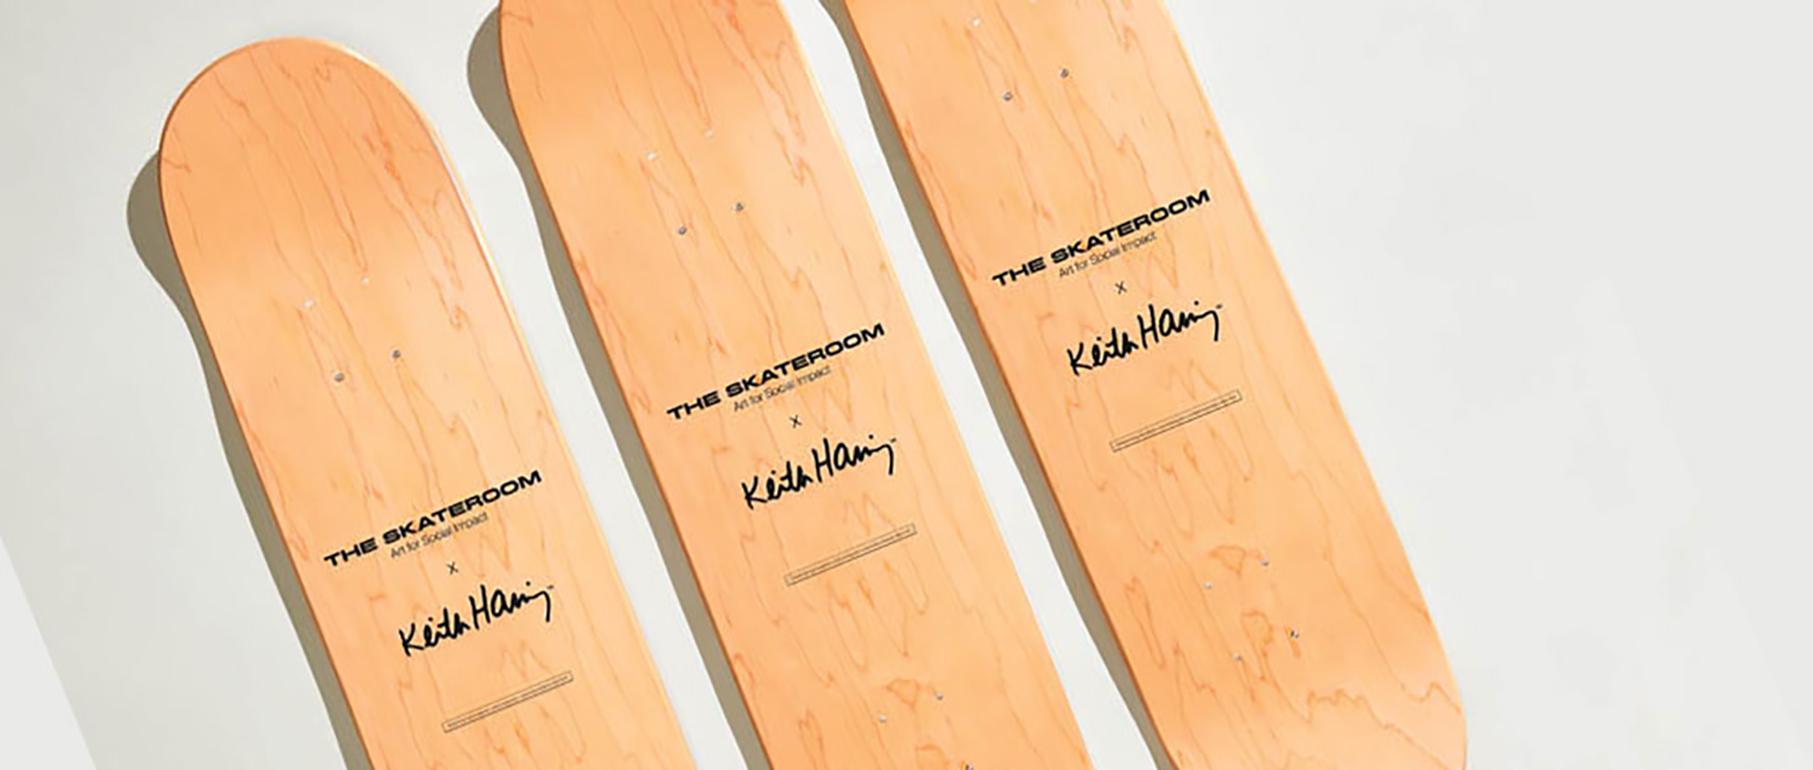 Set of three skateboard decks
7-ply Canadian Maplewood with screenprint
Measure: Each deck 31 H x 8 inches
Mounting hardware included
Open edition (screen-printed signature).

Shipping note: This item ships from Belgium. Please allow 5-7